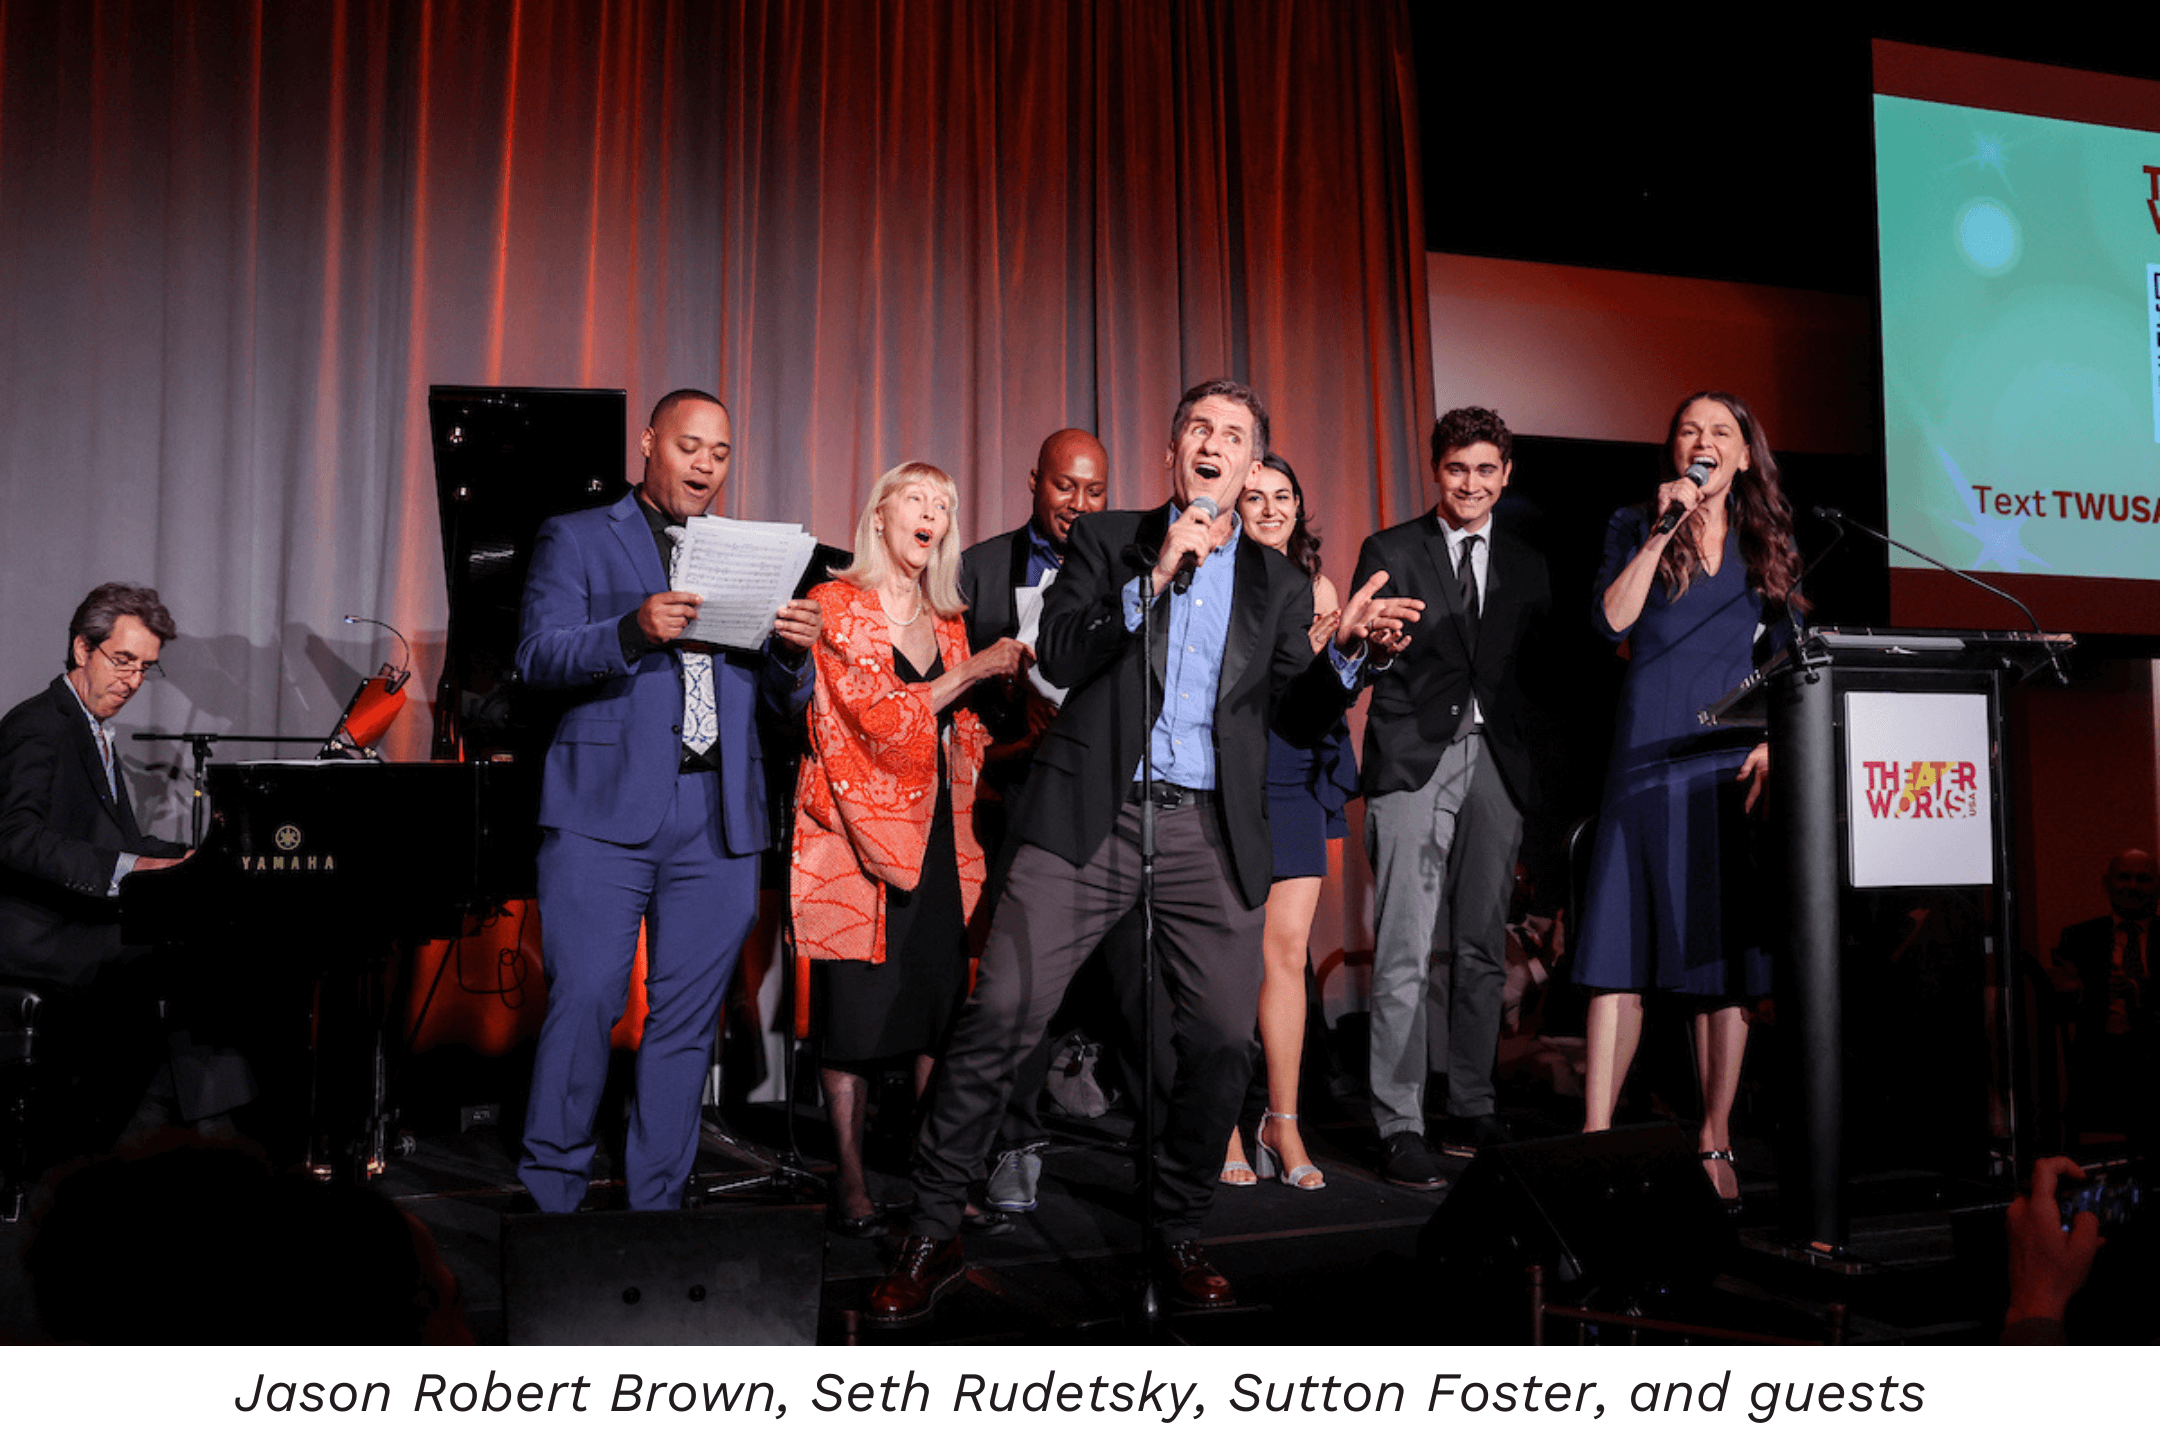 Jason Robert Brown, Seth Rudetsky, Sutton Foster and Guests